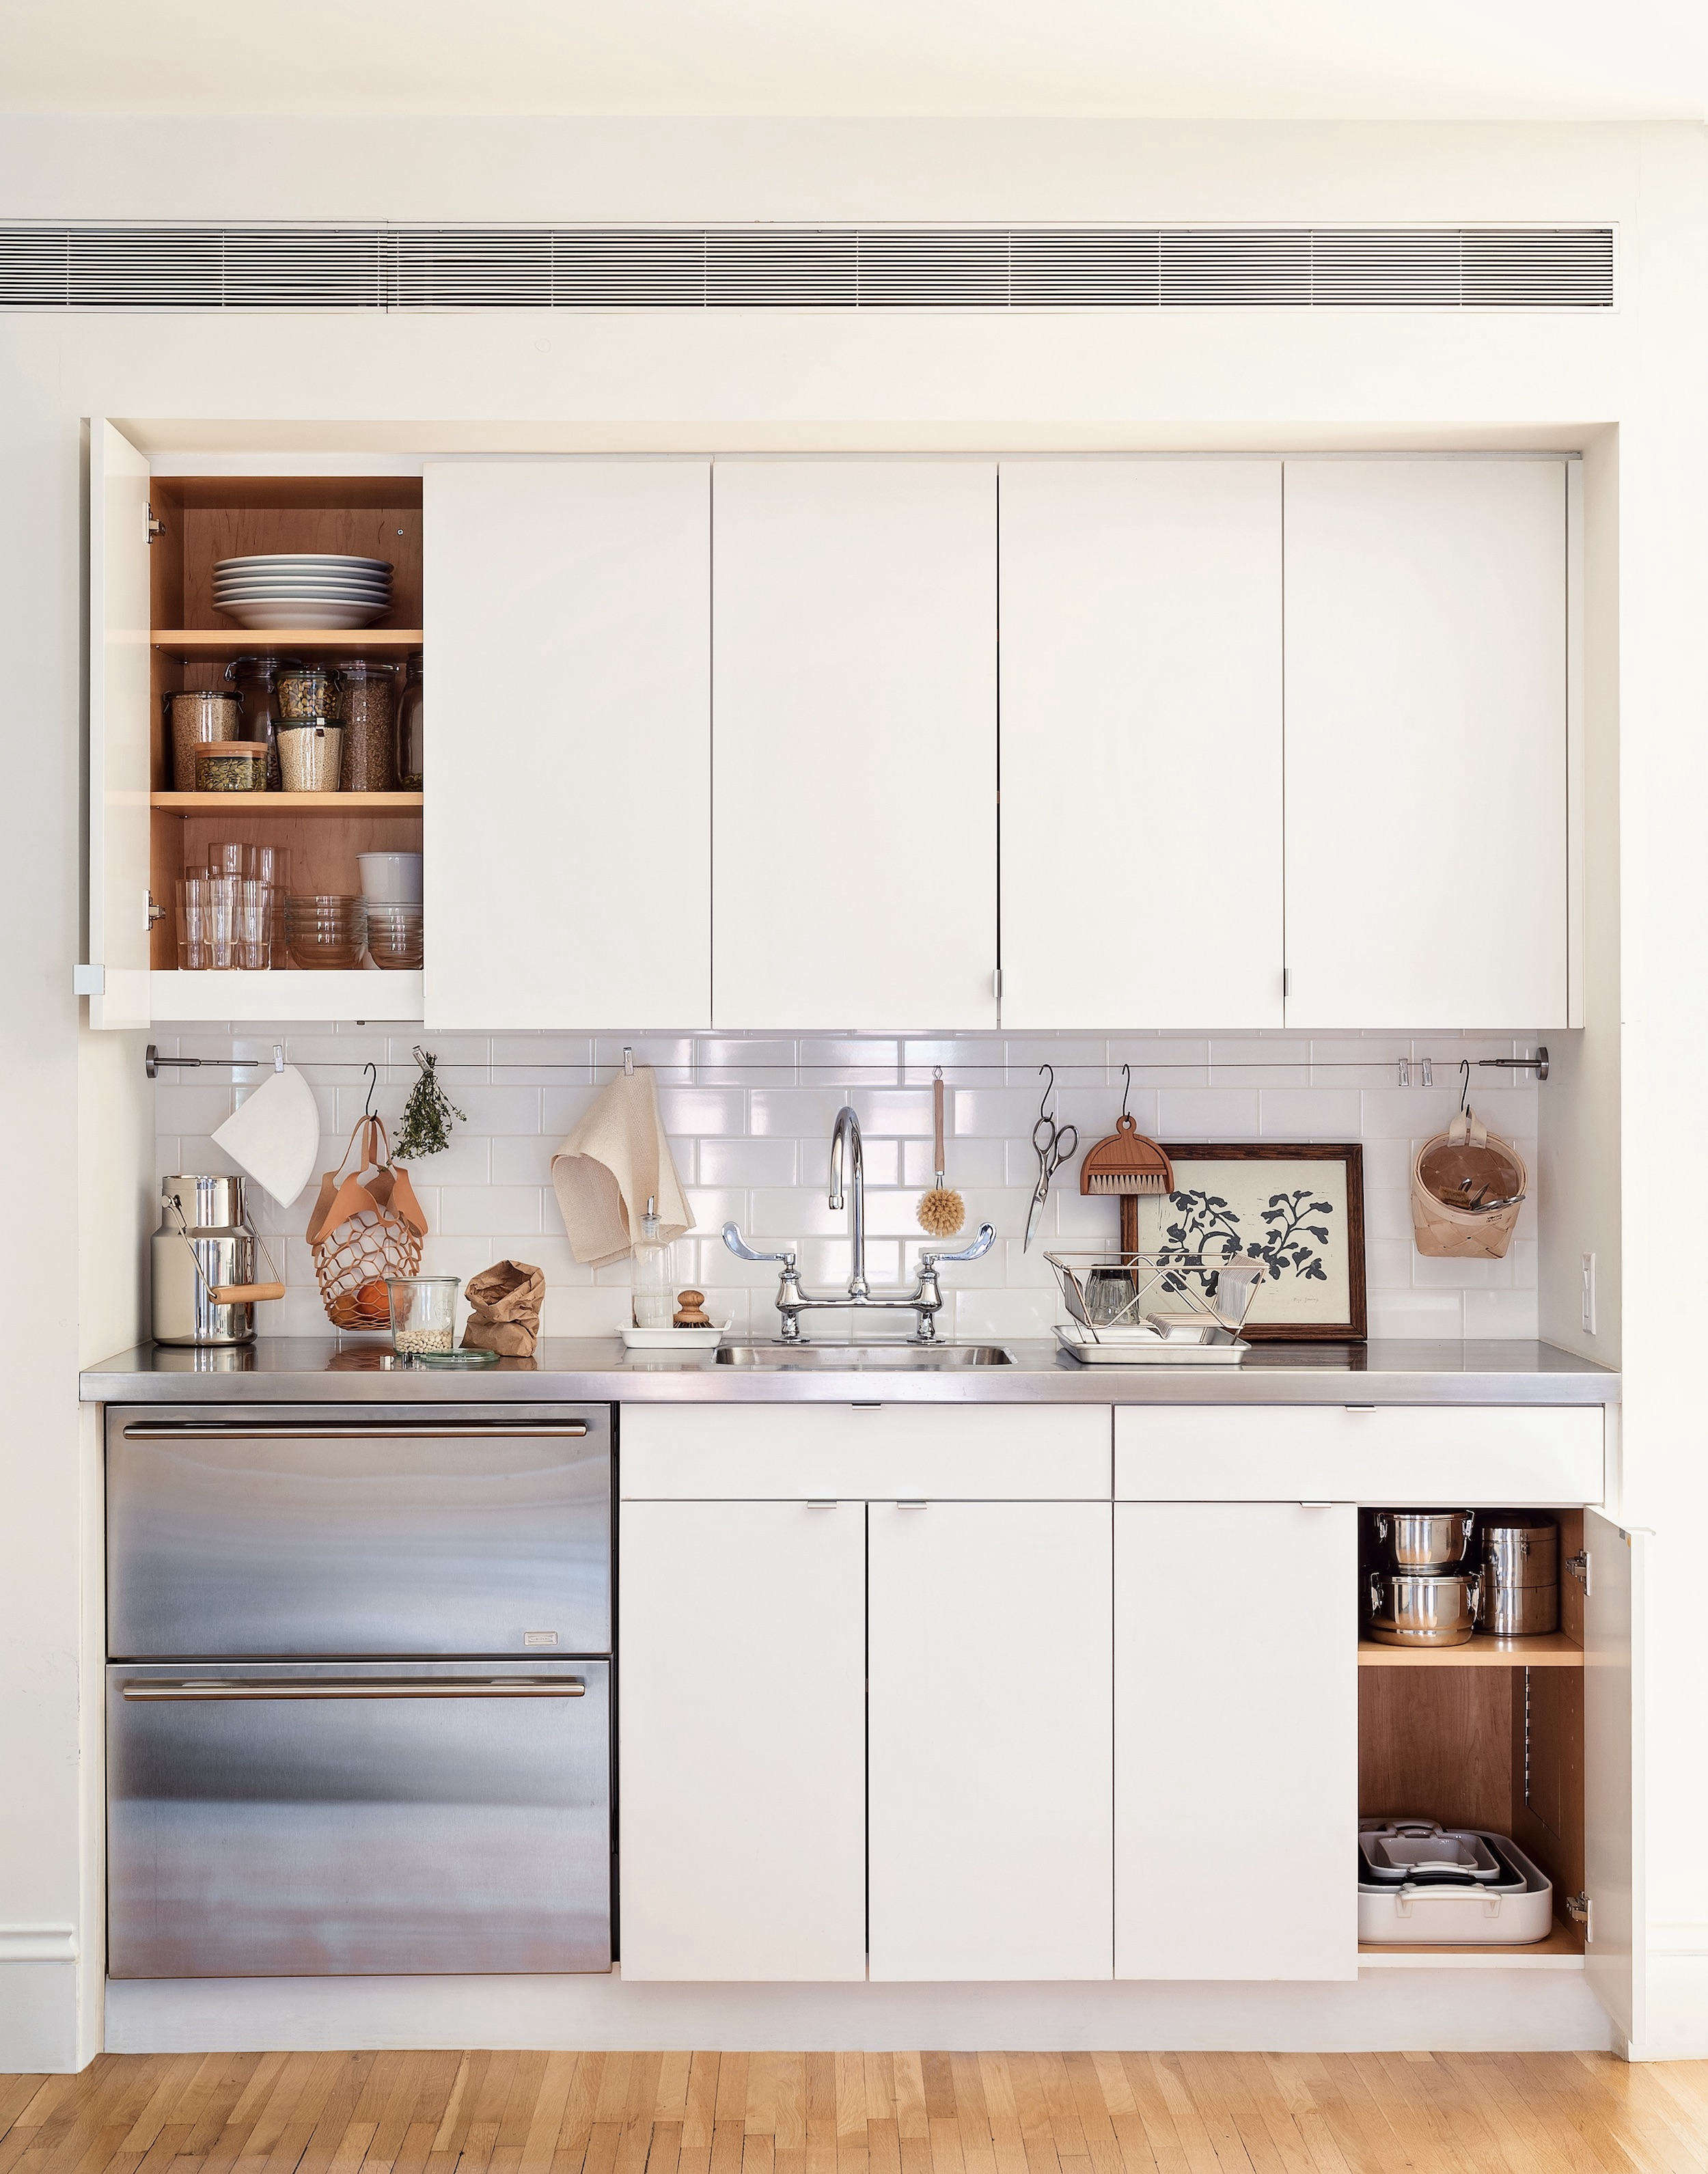 5 Space Saving Ideas To Steal From A Brooklyn Kitchen Ikea Hack Included